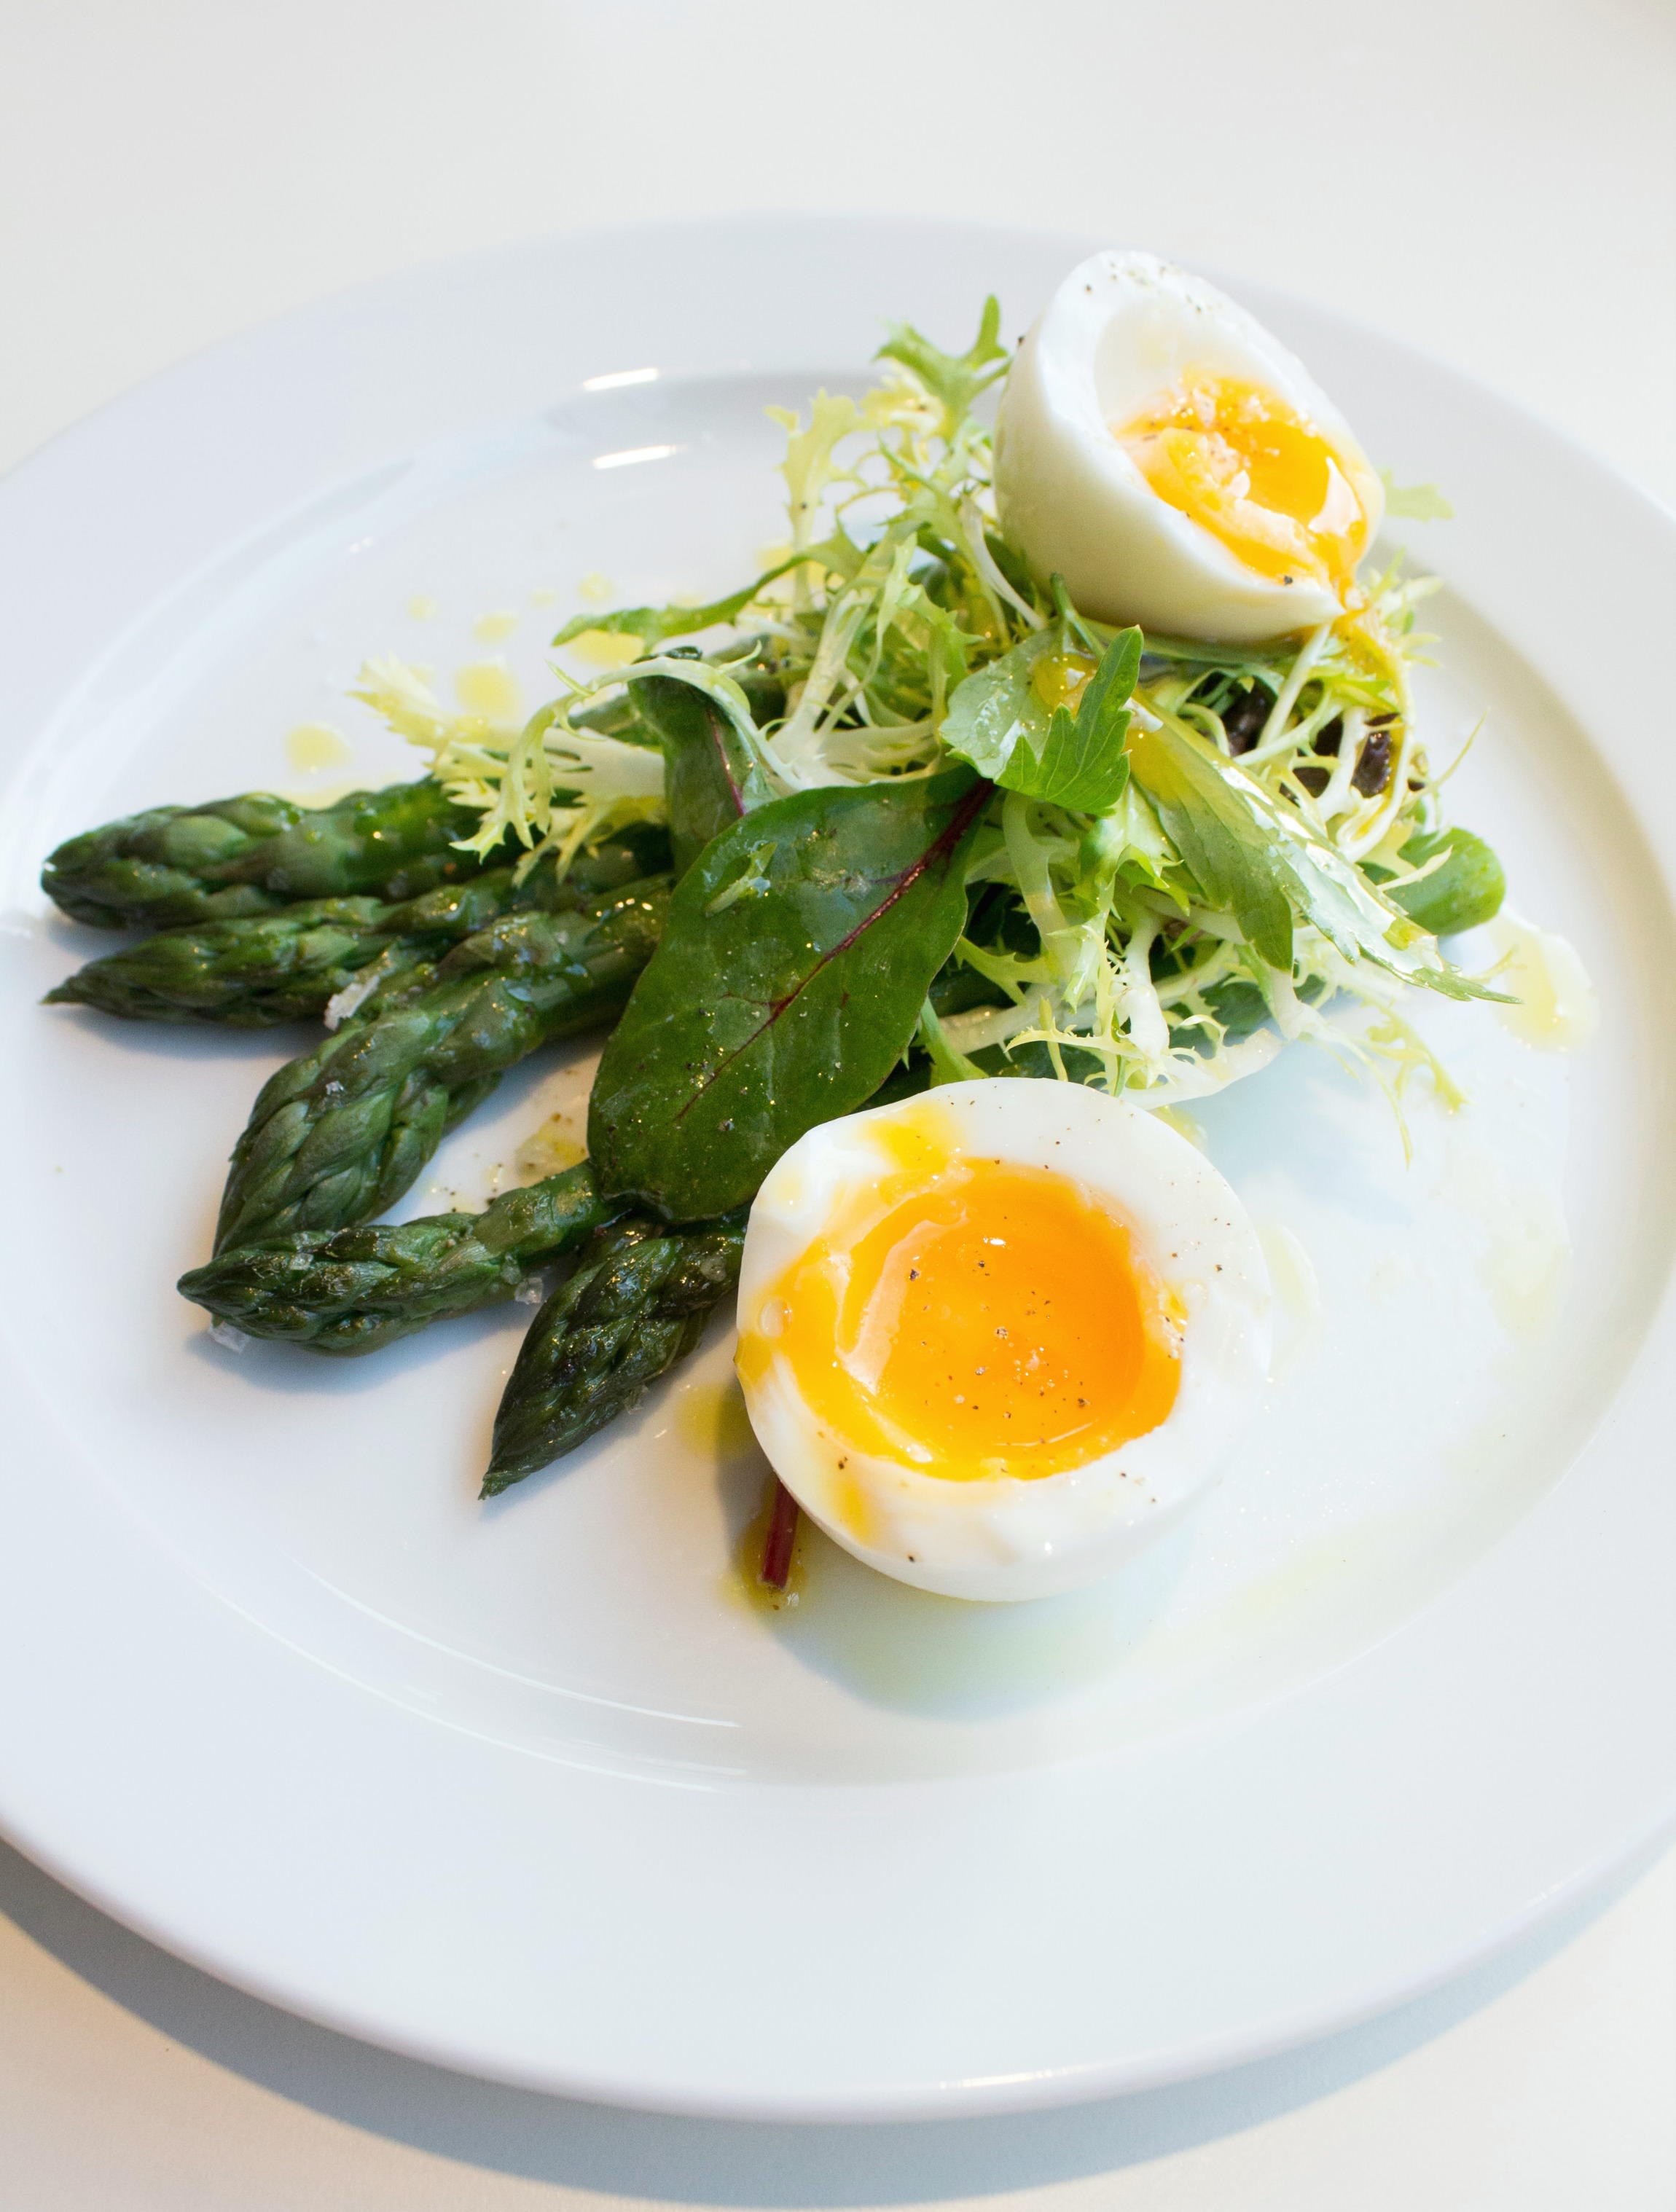 Albion-Clerkenwell-Asparagus-and-egg-salad-photo-by-Geraldine-Tan-of-blog-Little-Big-Bell-